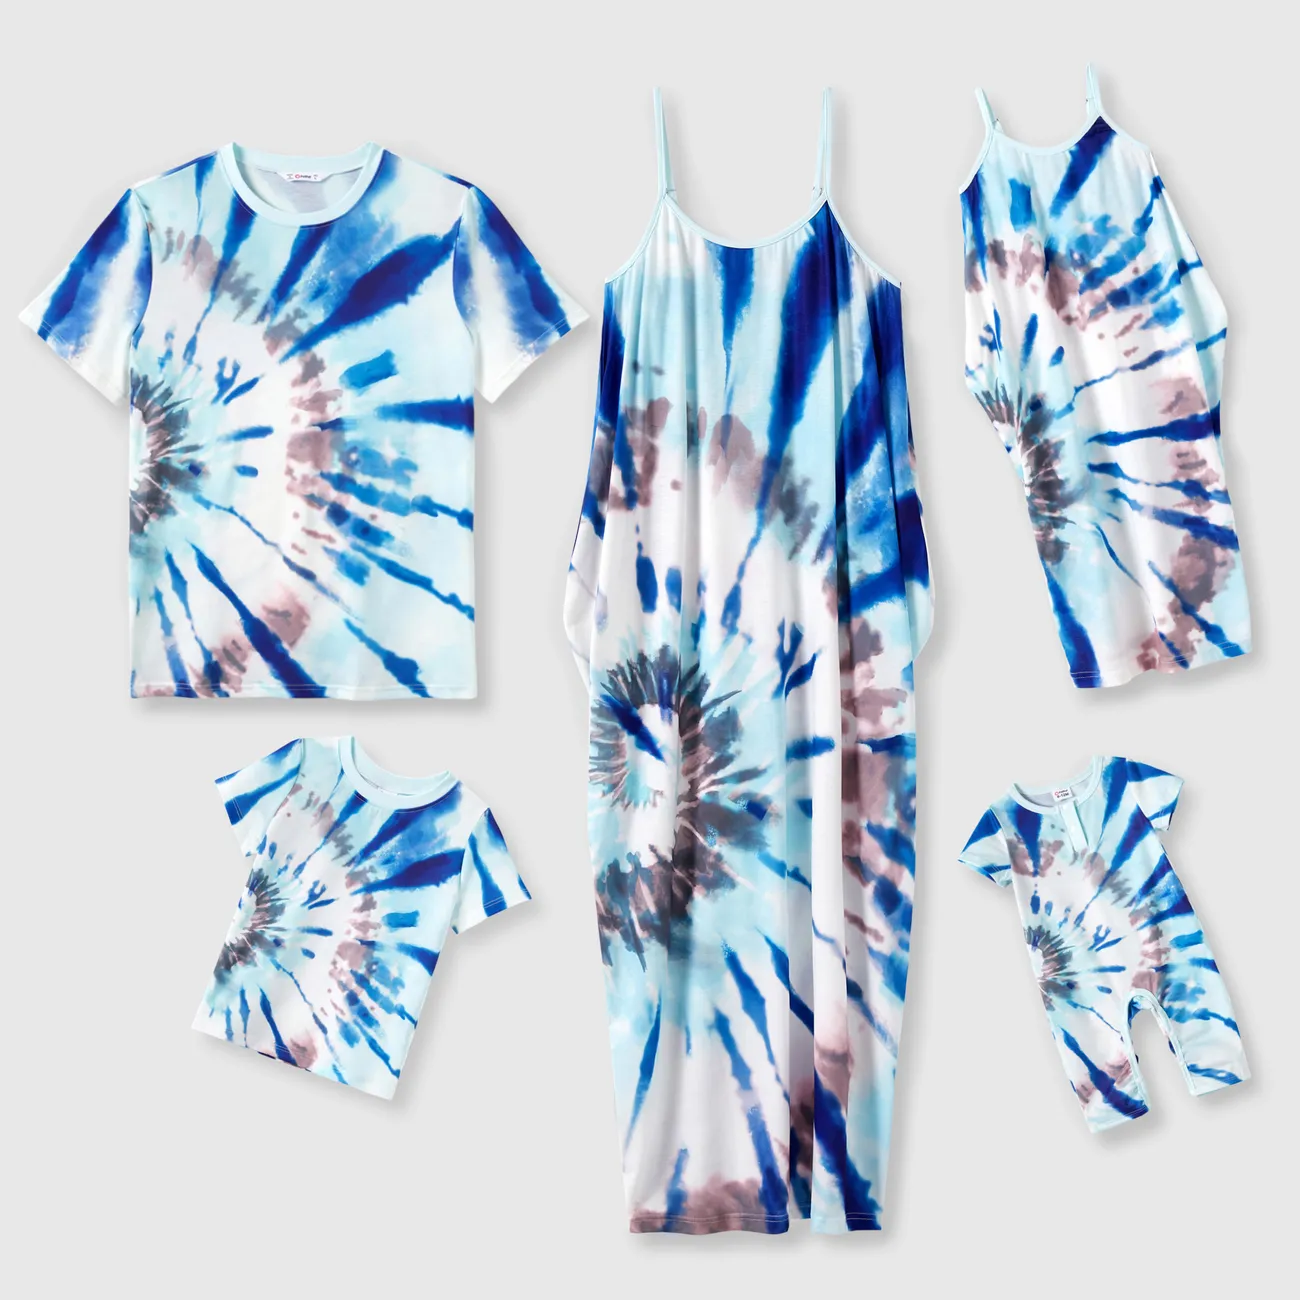 Family Matching Sets Blue Twirl Tie-Dye Tee or Strap Dress with Pockets lightbluewhite big image 1